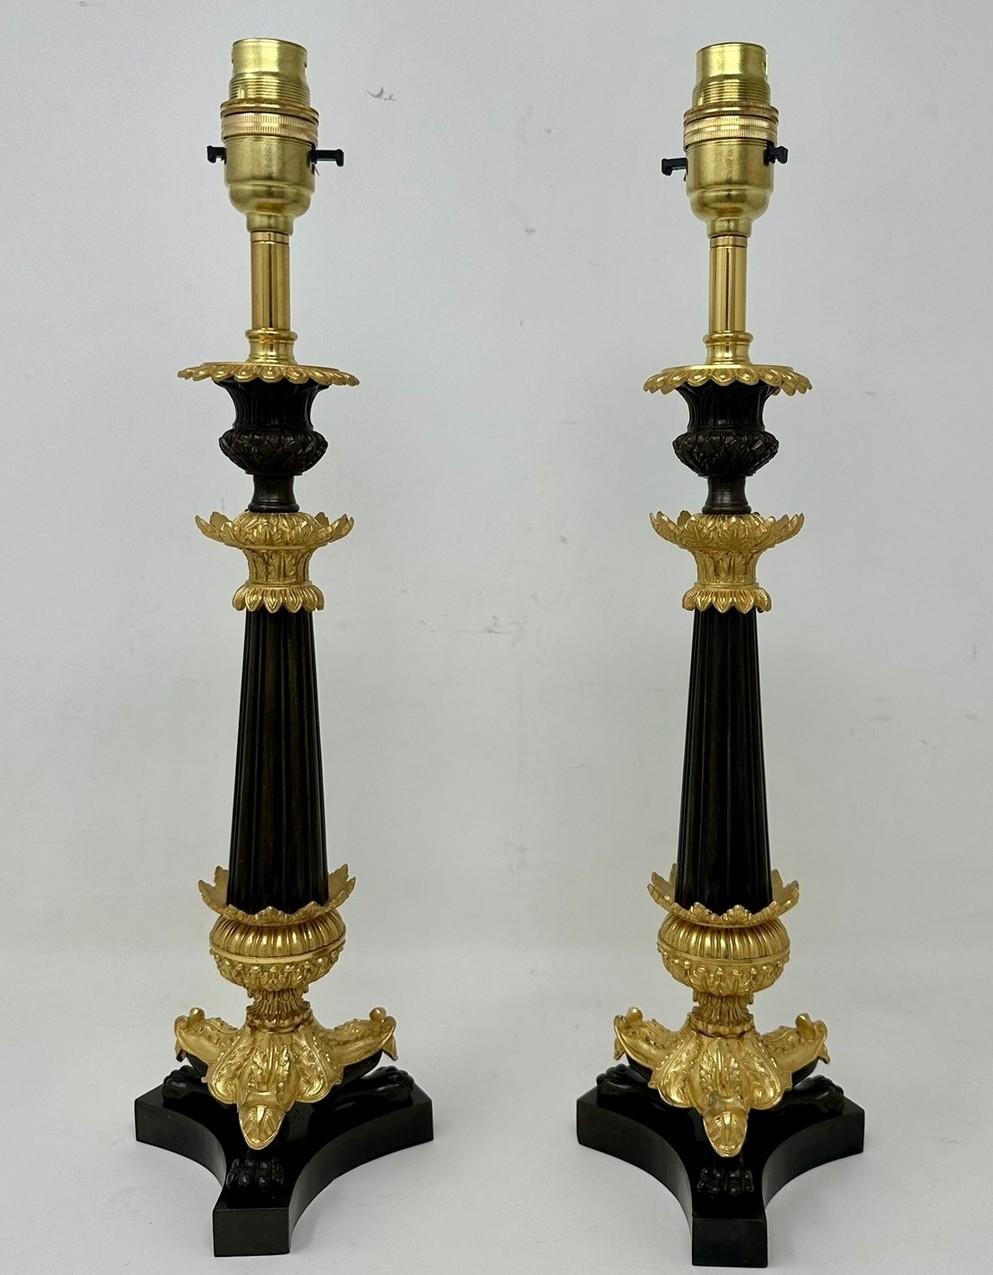 Antique Pair French Doré Bronze Neoclassical Ormolu Gilt Candlestick Table Lamps In Good Condition For Sale In Dublin, Ireland